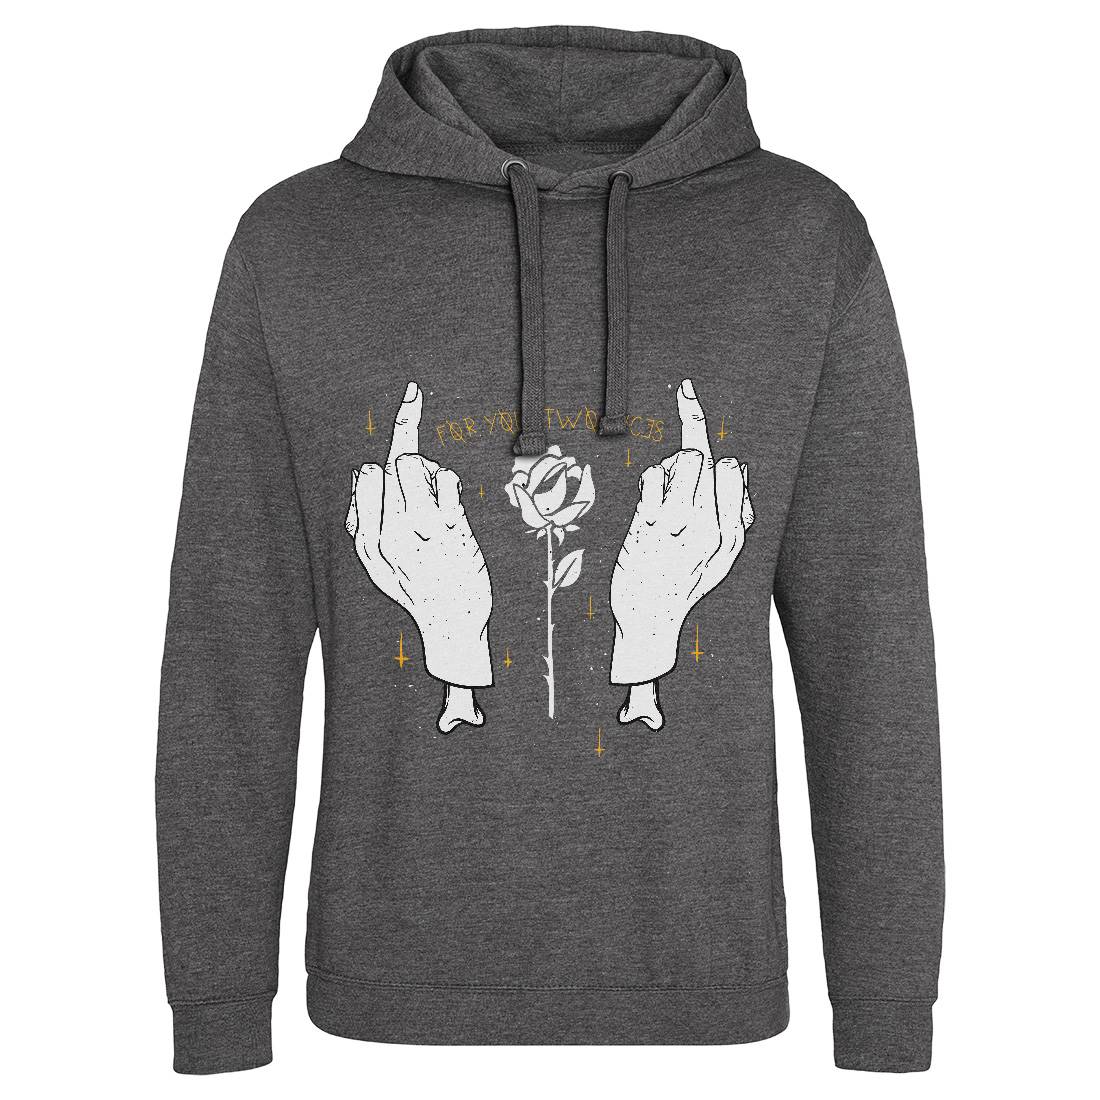 For Your Two Faces Mens Hoodie Without Pocket Quotes D456